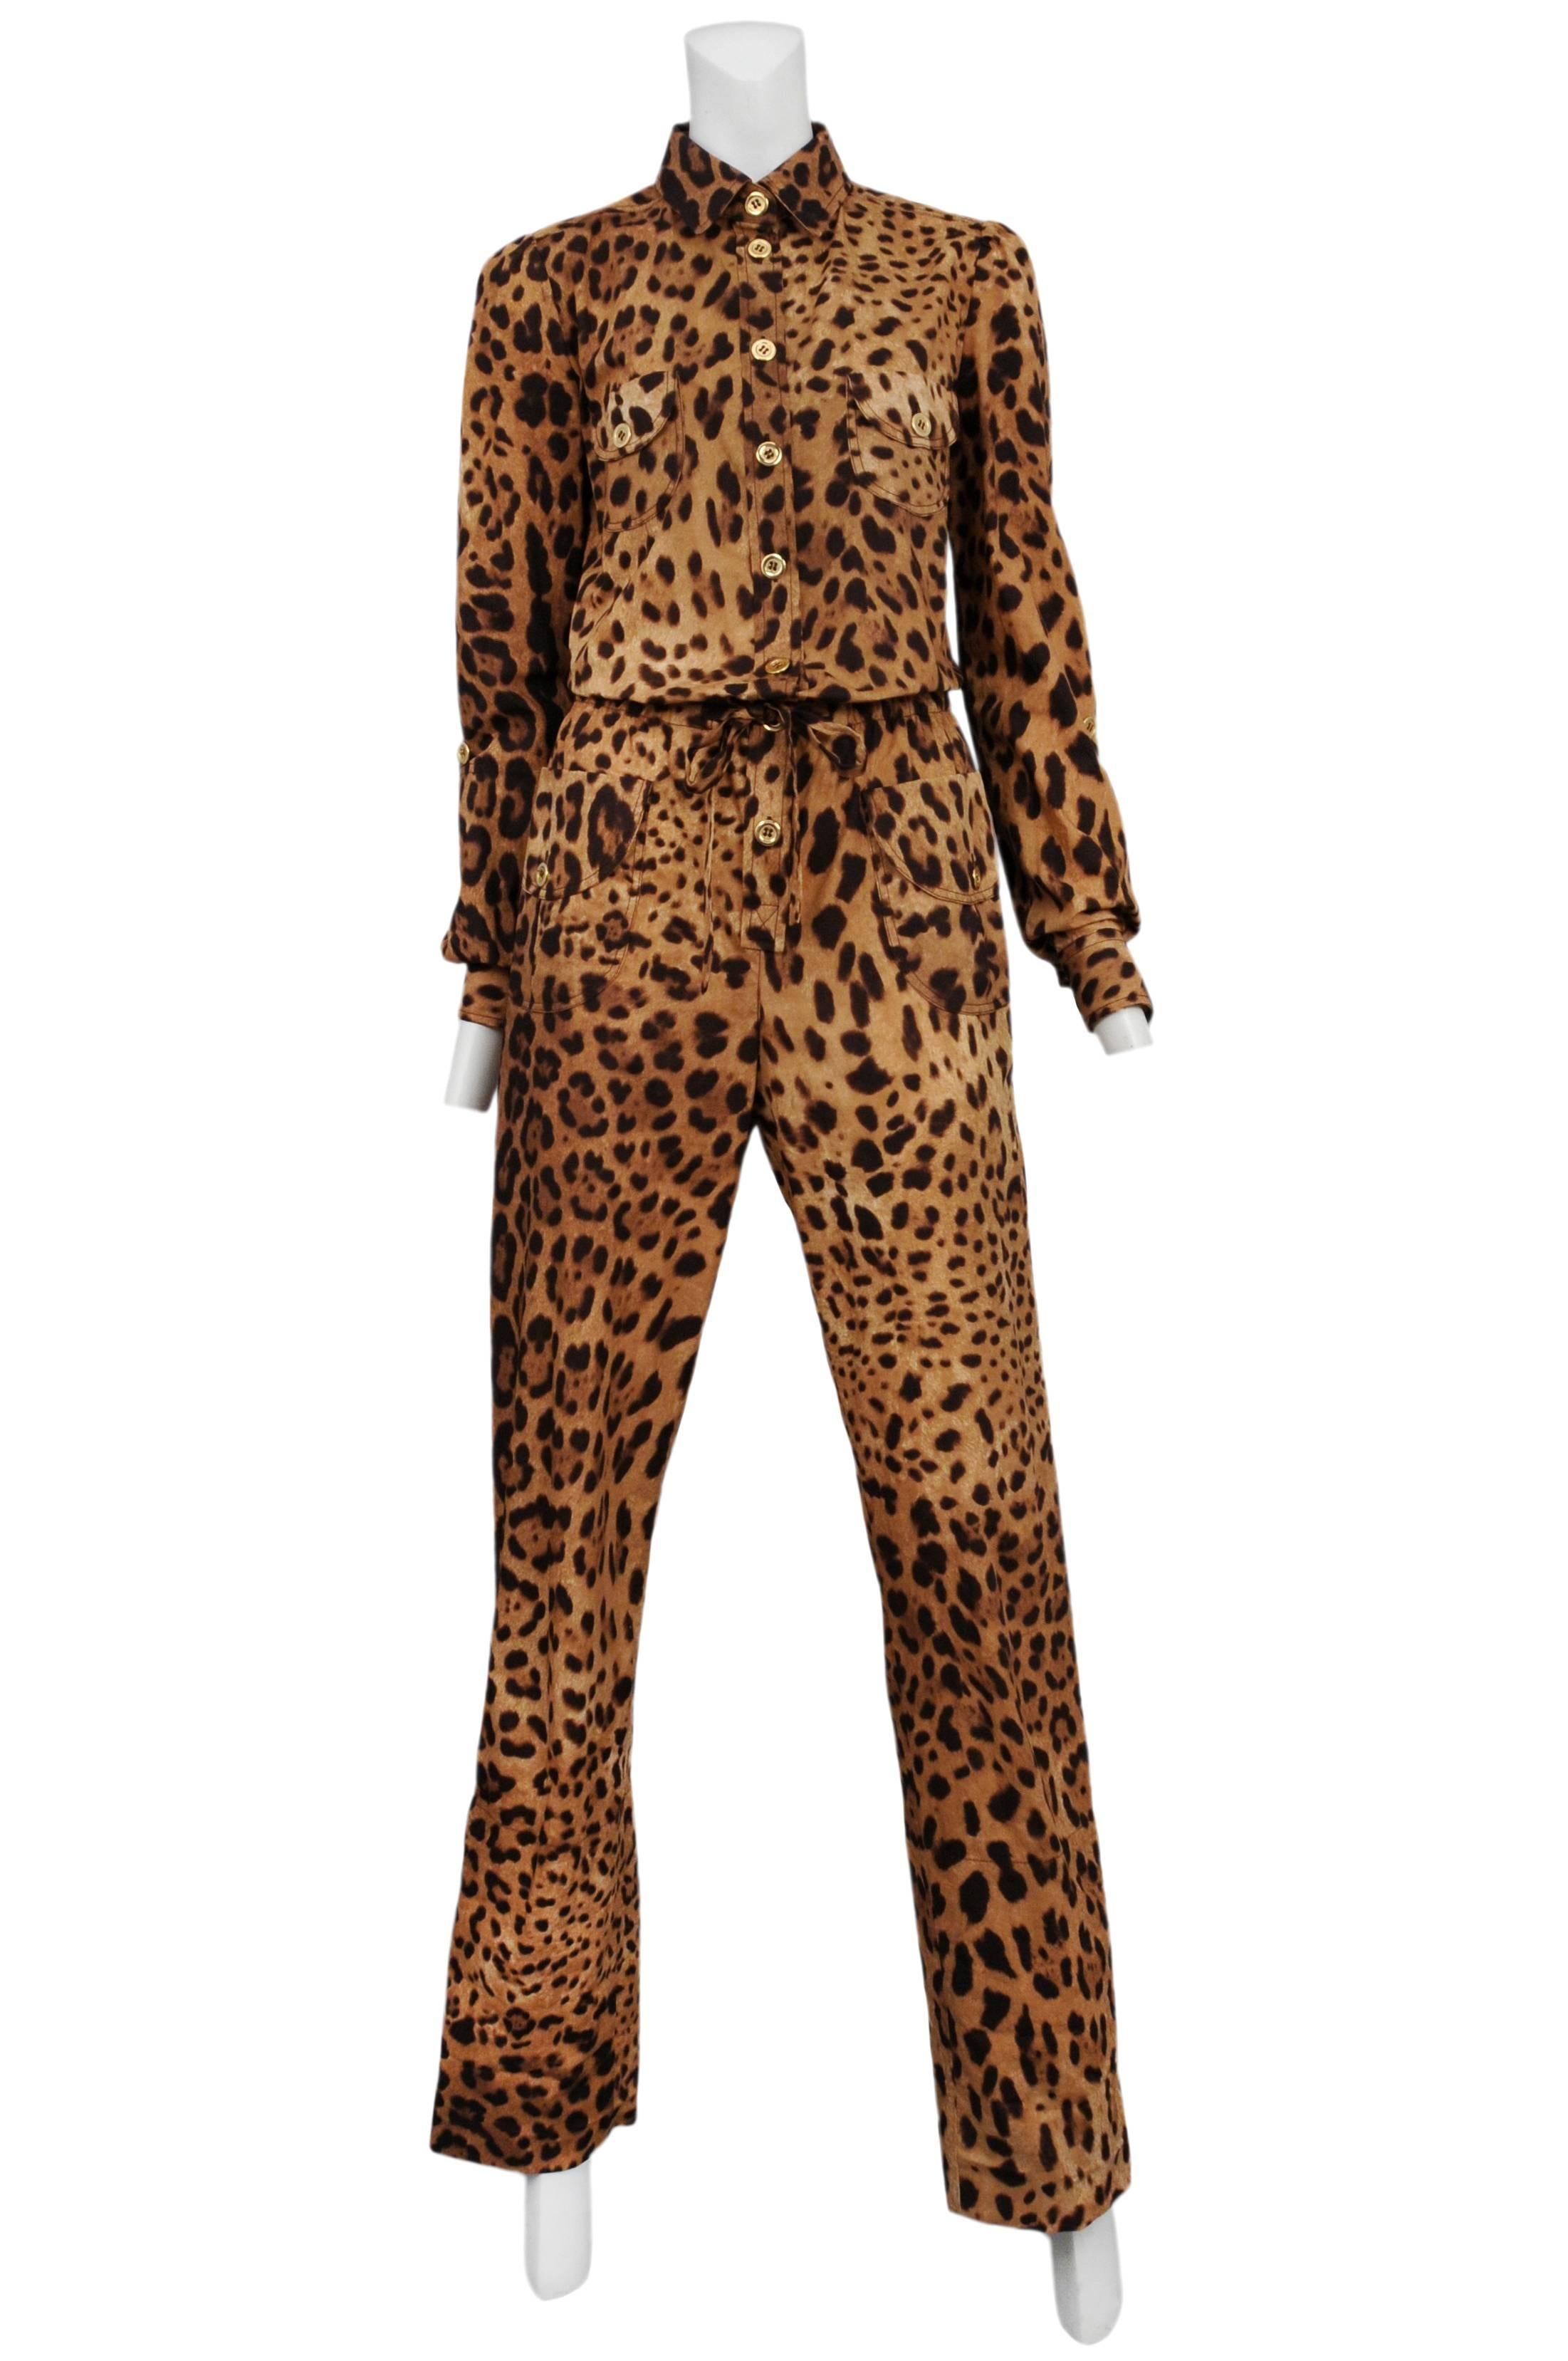 Vintage Dolce & Gabbana leopard jumpsuit featuring gold buttons, chest and hip pockets, and a drawstring at the waist.
Please inquire for additional images.